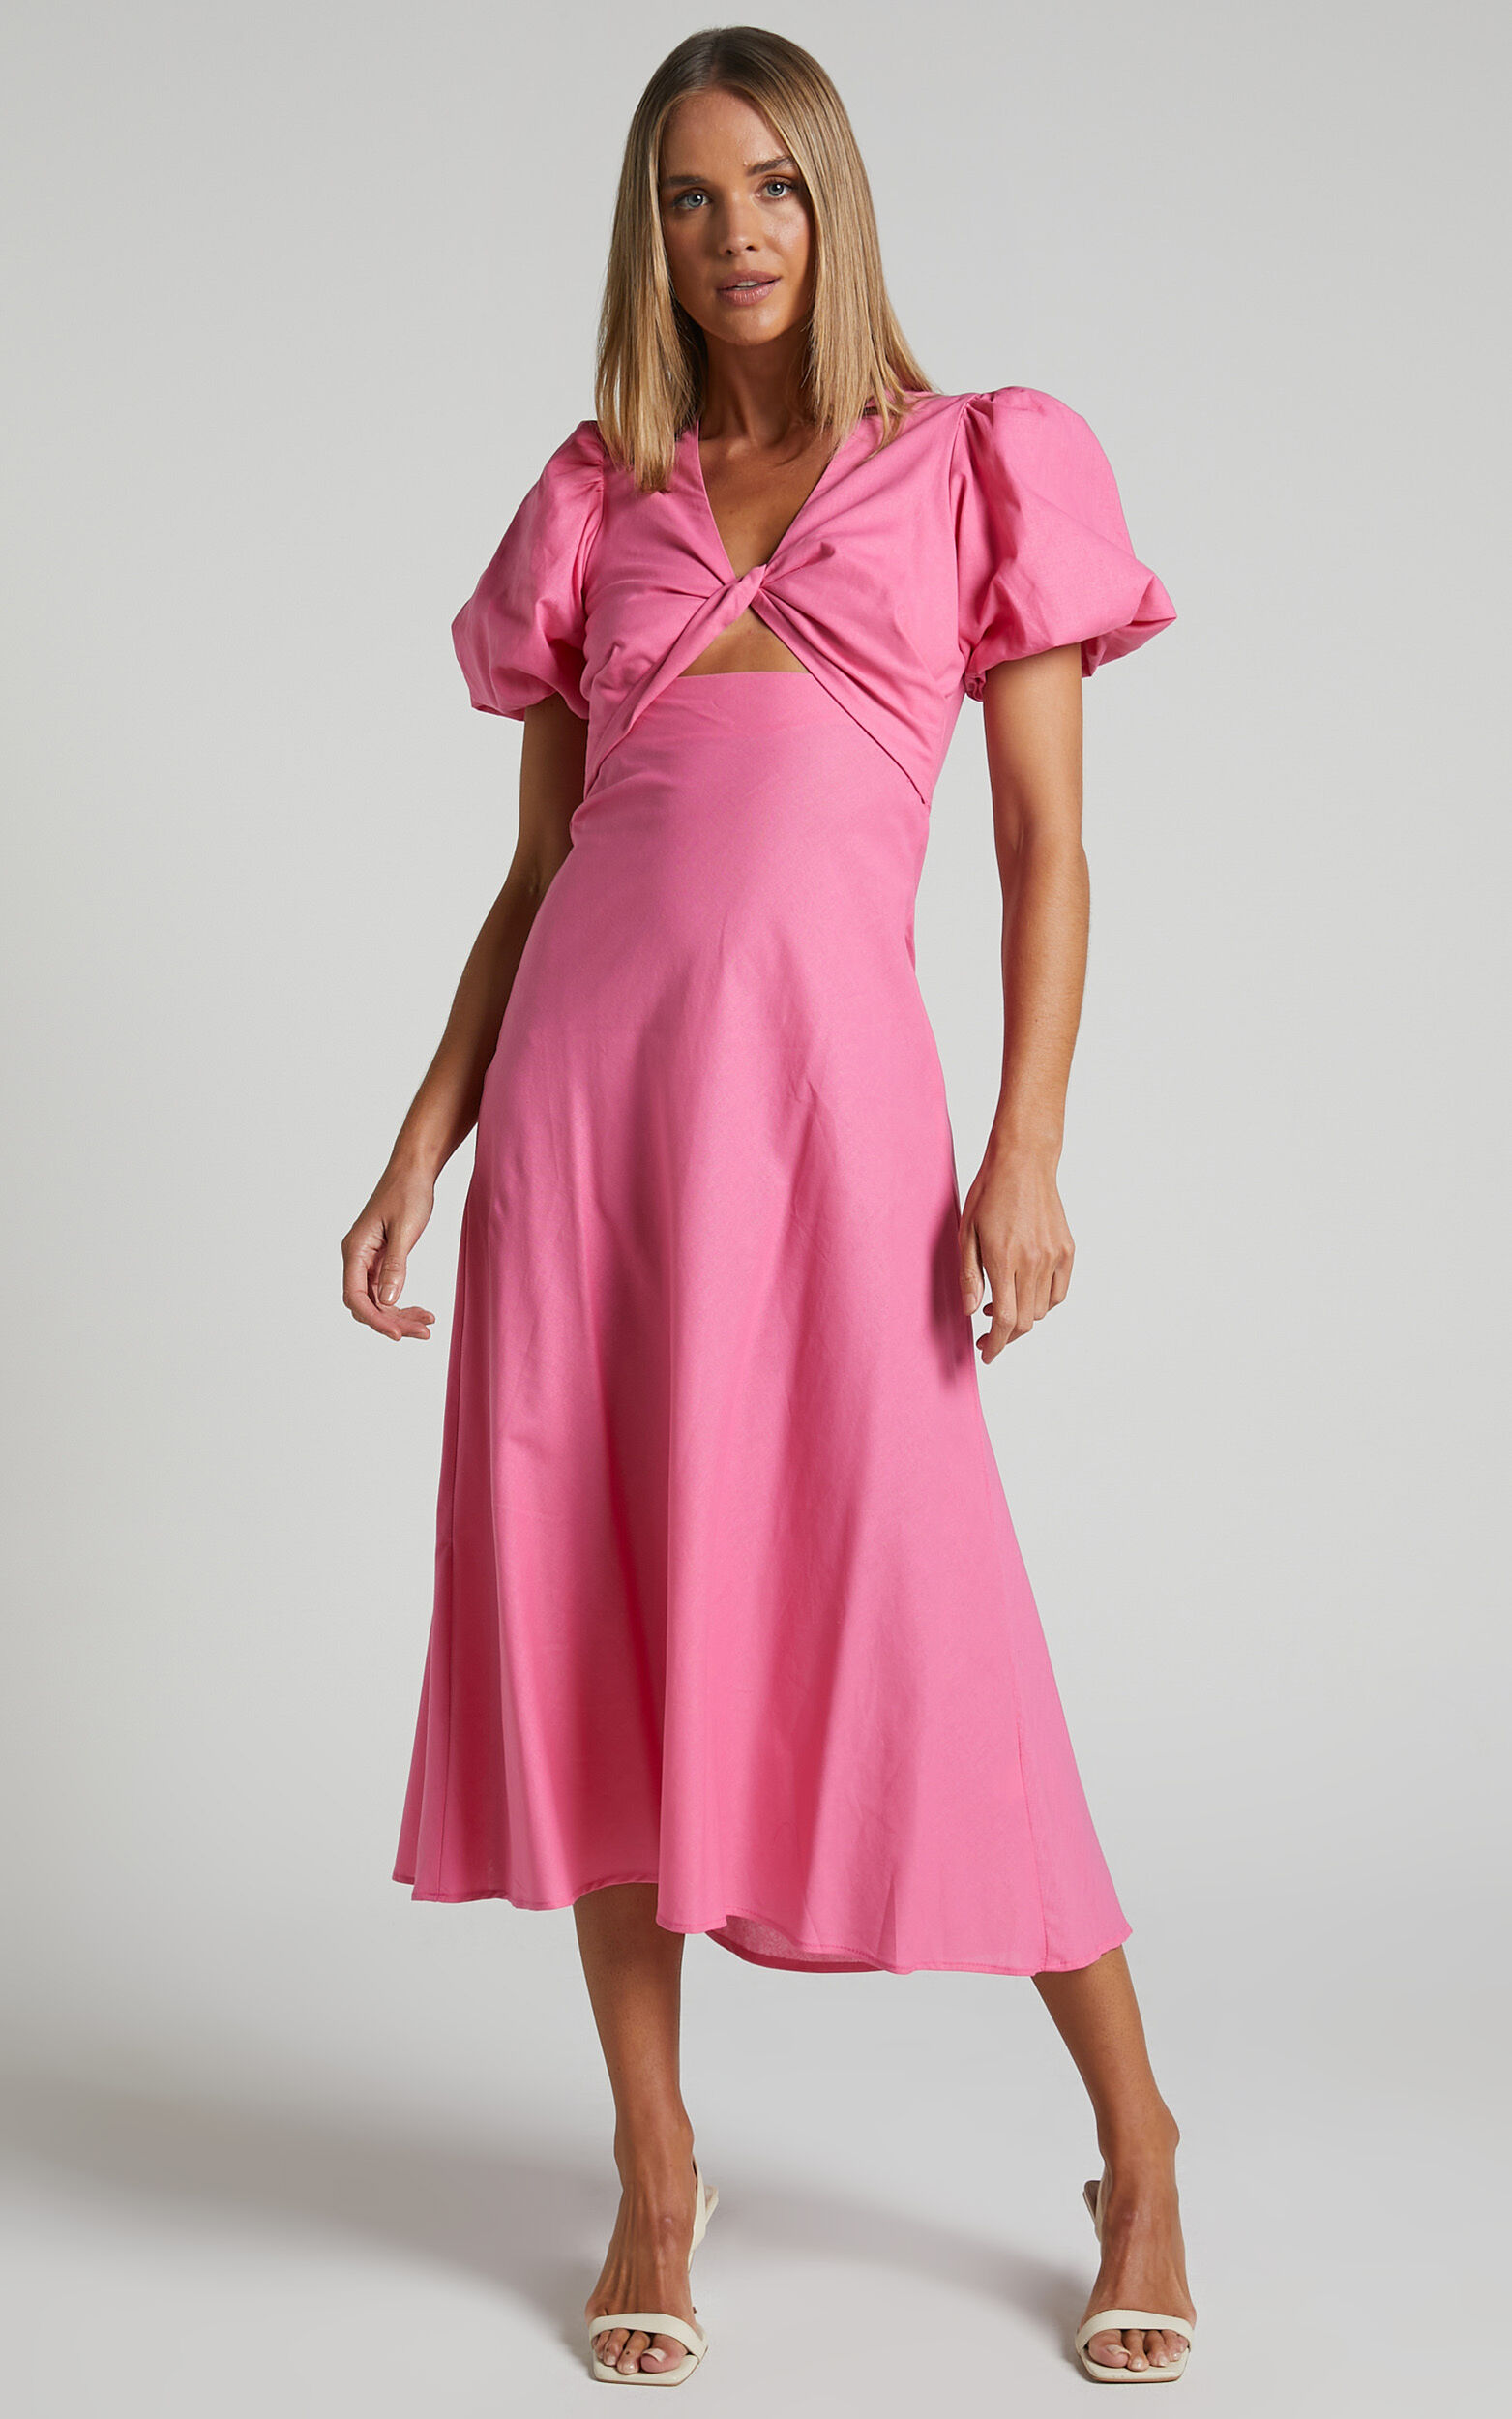 Kalilah Midi Dress - Linen Look Twist Front Cut Out Puff Sleeve Dress in Pink - 06, PNK1